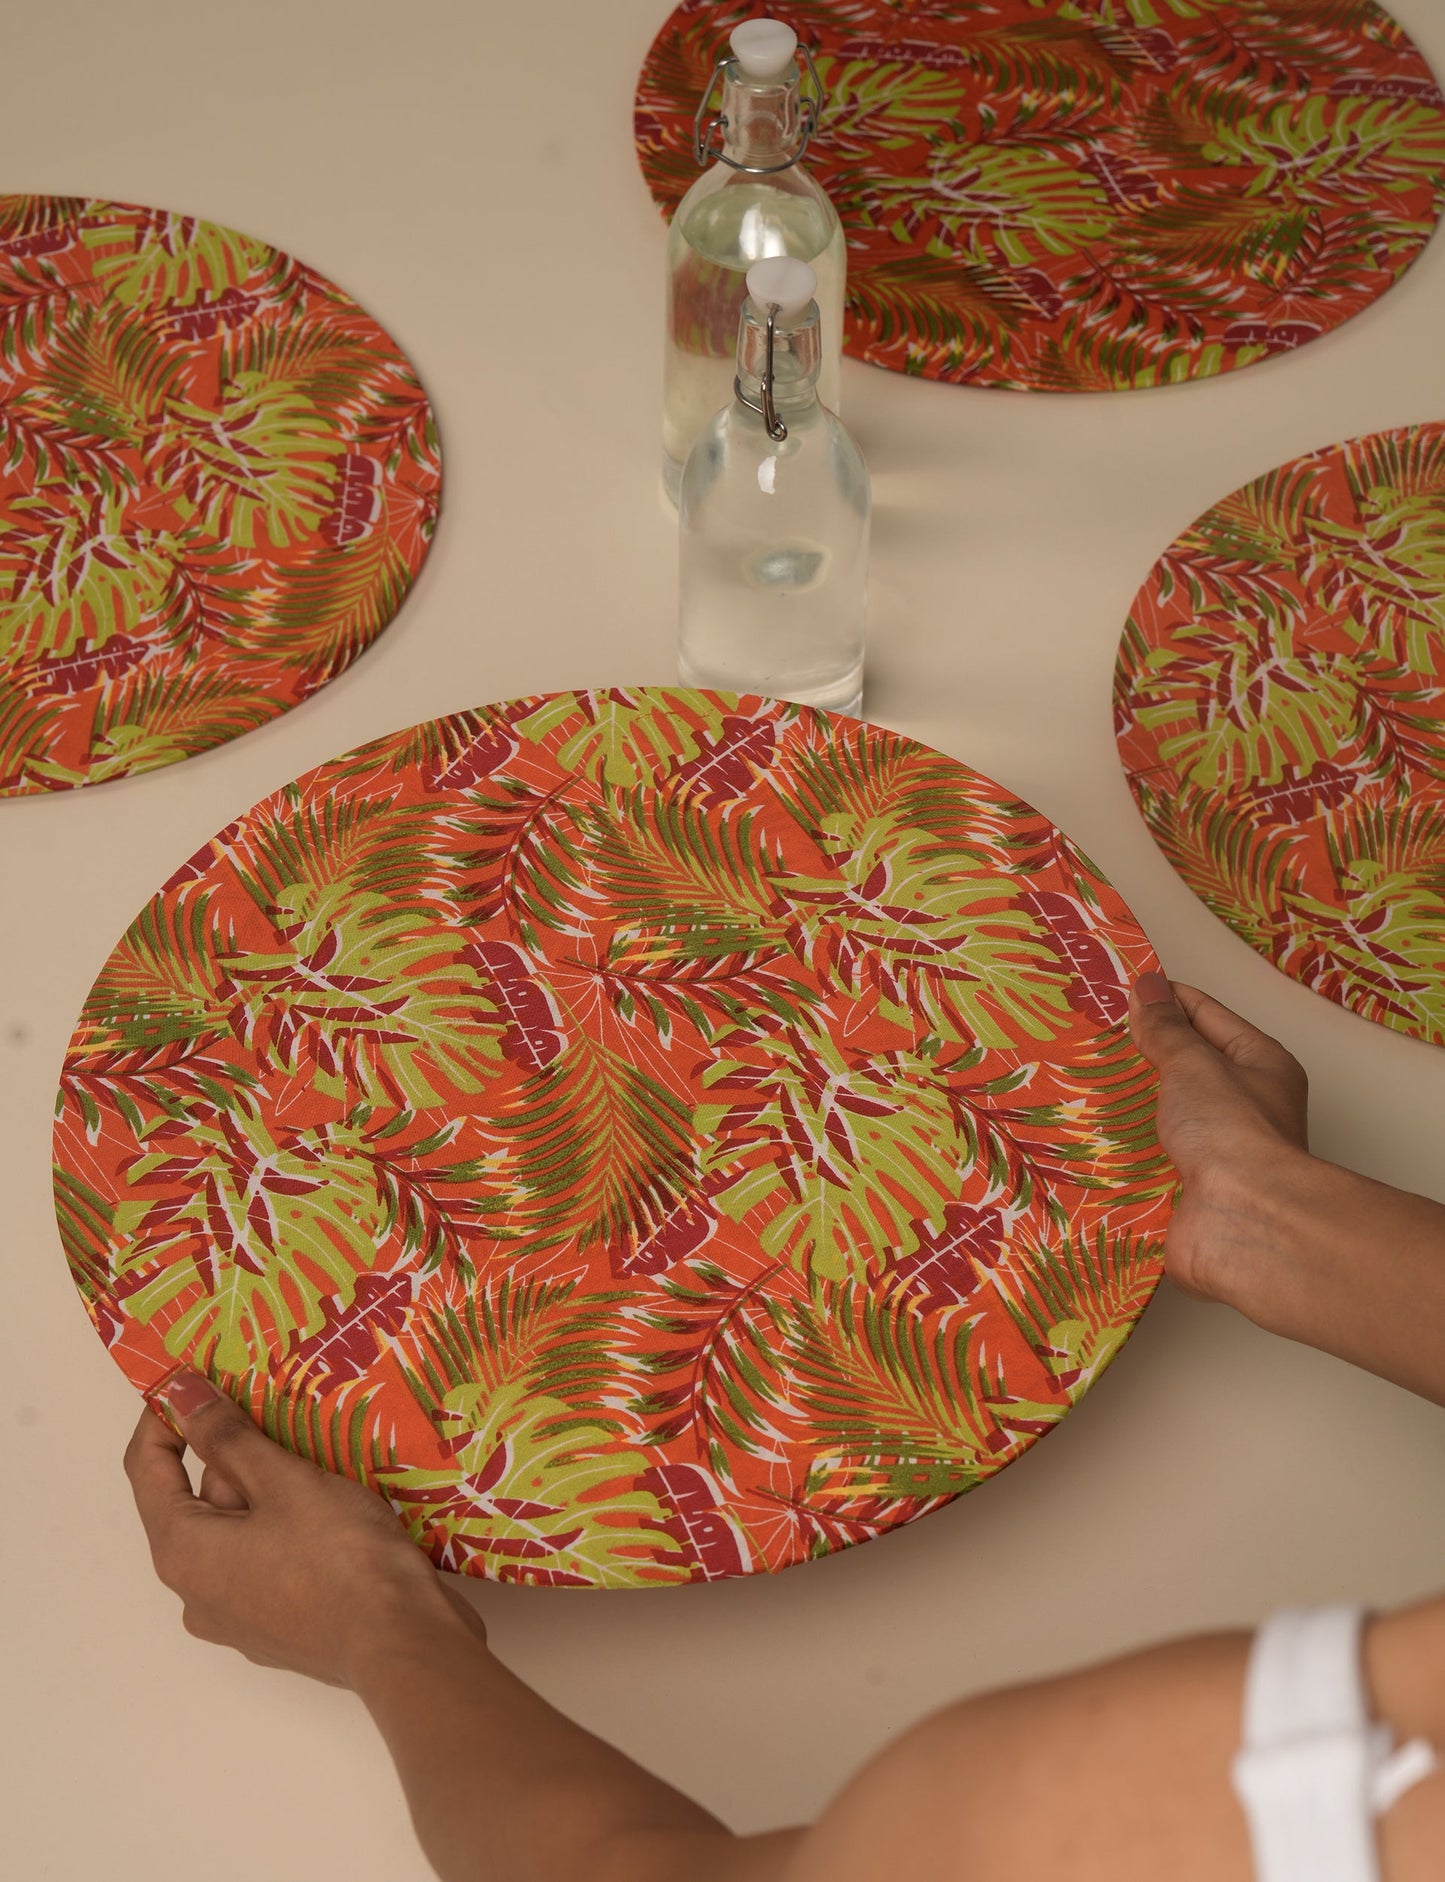 Upgrade your table settings with our Round Placemat Set of 4. These circular placemats, made from sustainable 3 mm thick MDF, feature covers crafted from round sari sleeves. Easily washable and elasticated, these placemats offer a stylish and eco-friendly solution for both table place settings and serving dishes. Make a sustainable statement with every meal.